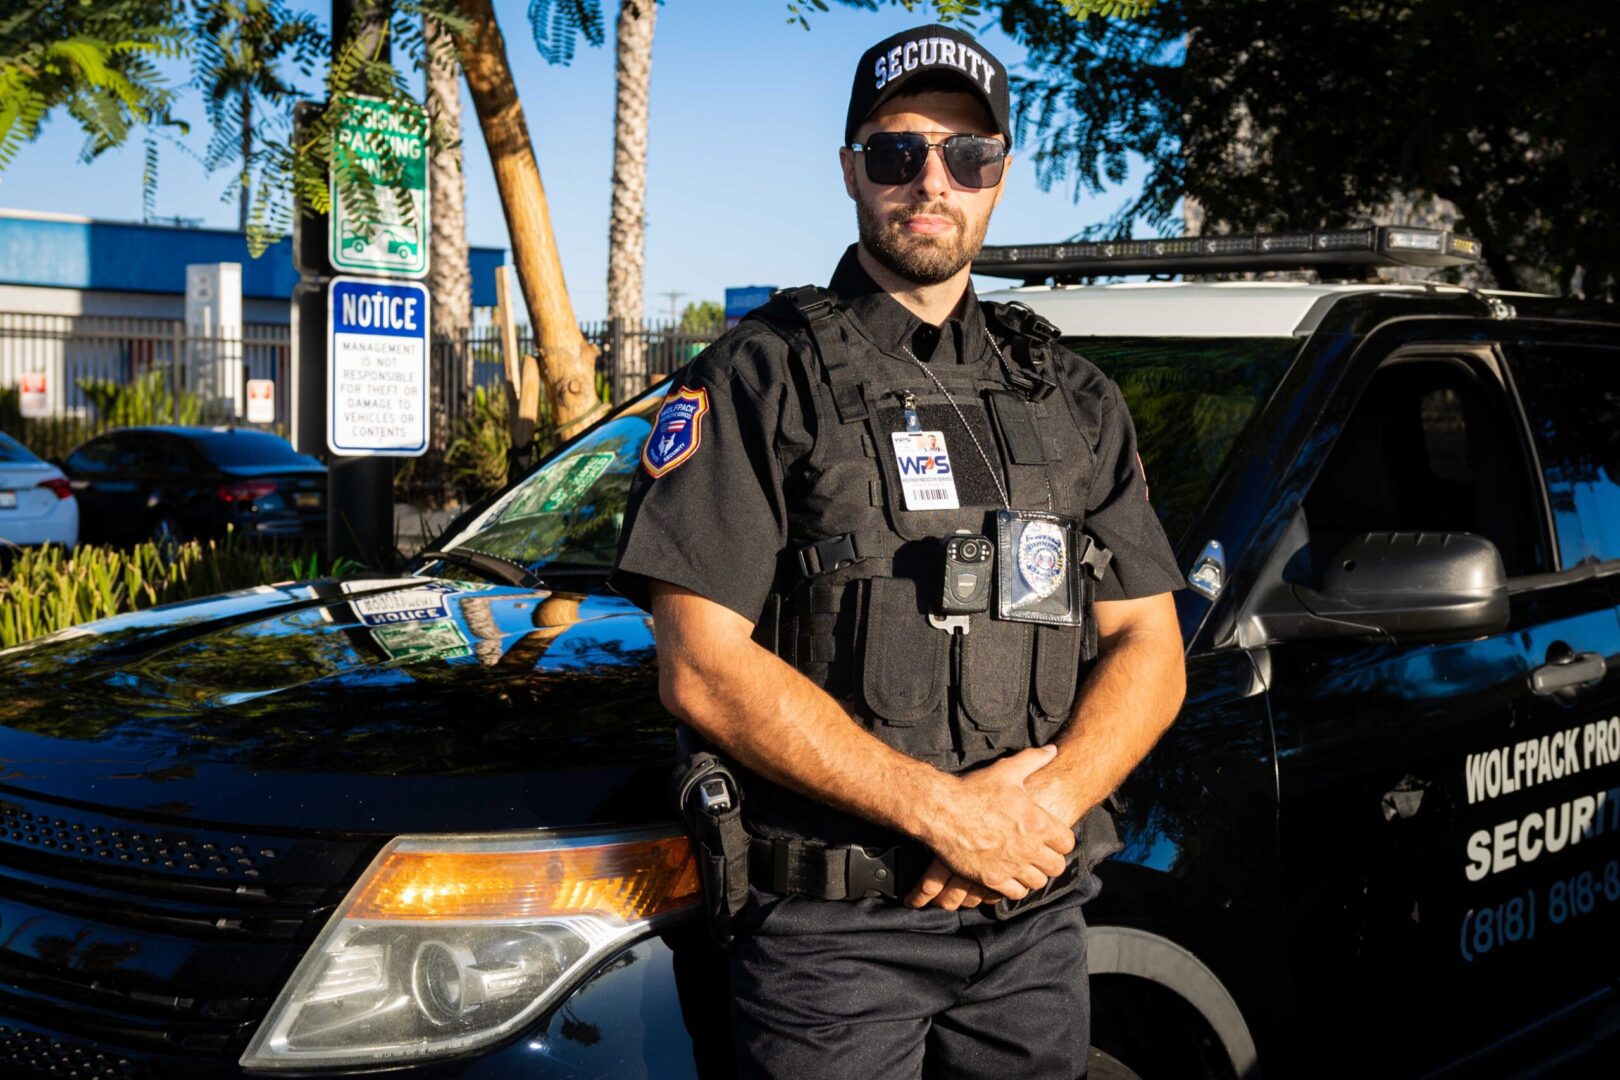 A police officer standing next to his car.